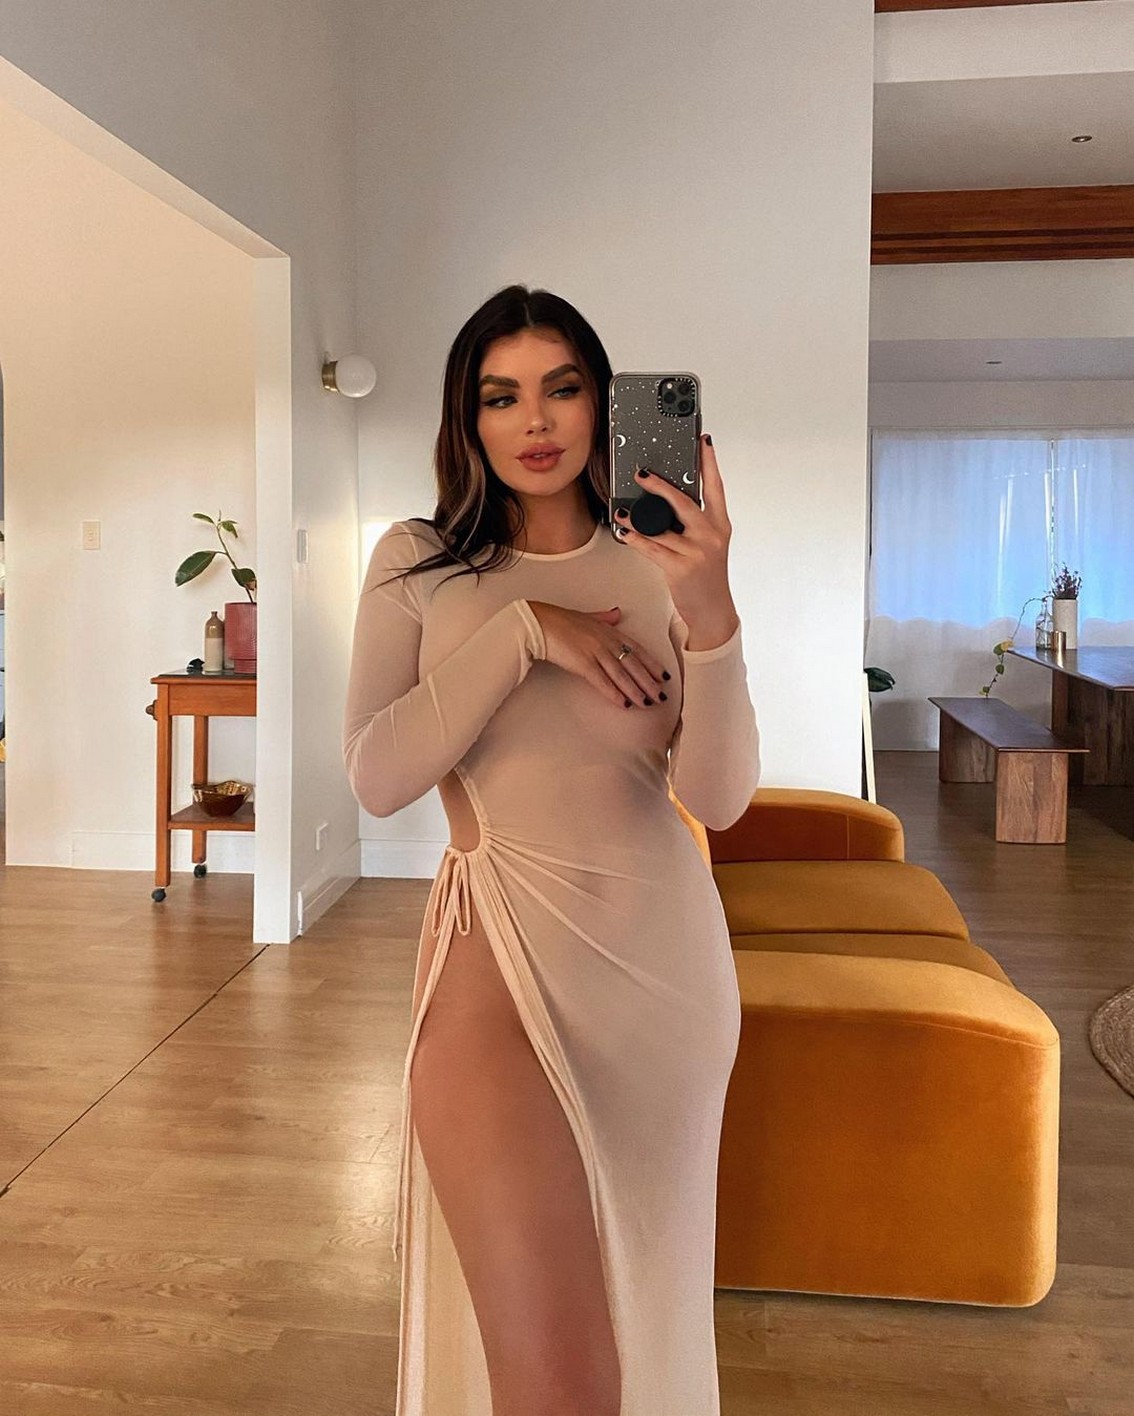 Nicole Thorne See Through TheFappening.Pro 5 - Nicole Thorne See Through (14 Photos)